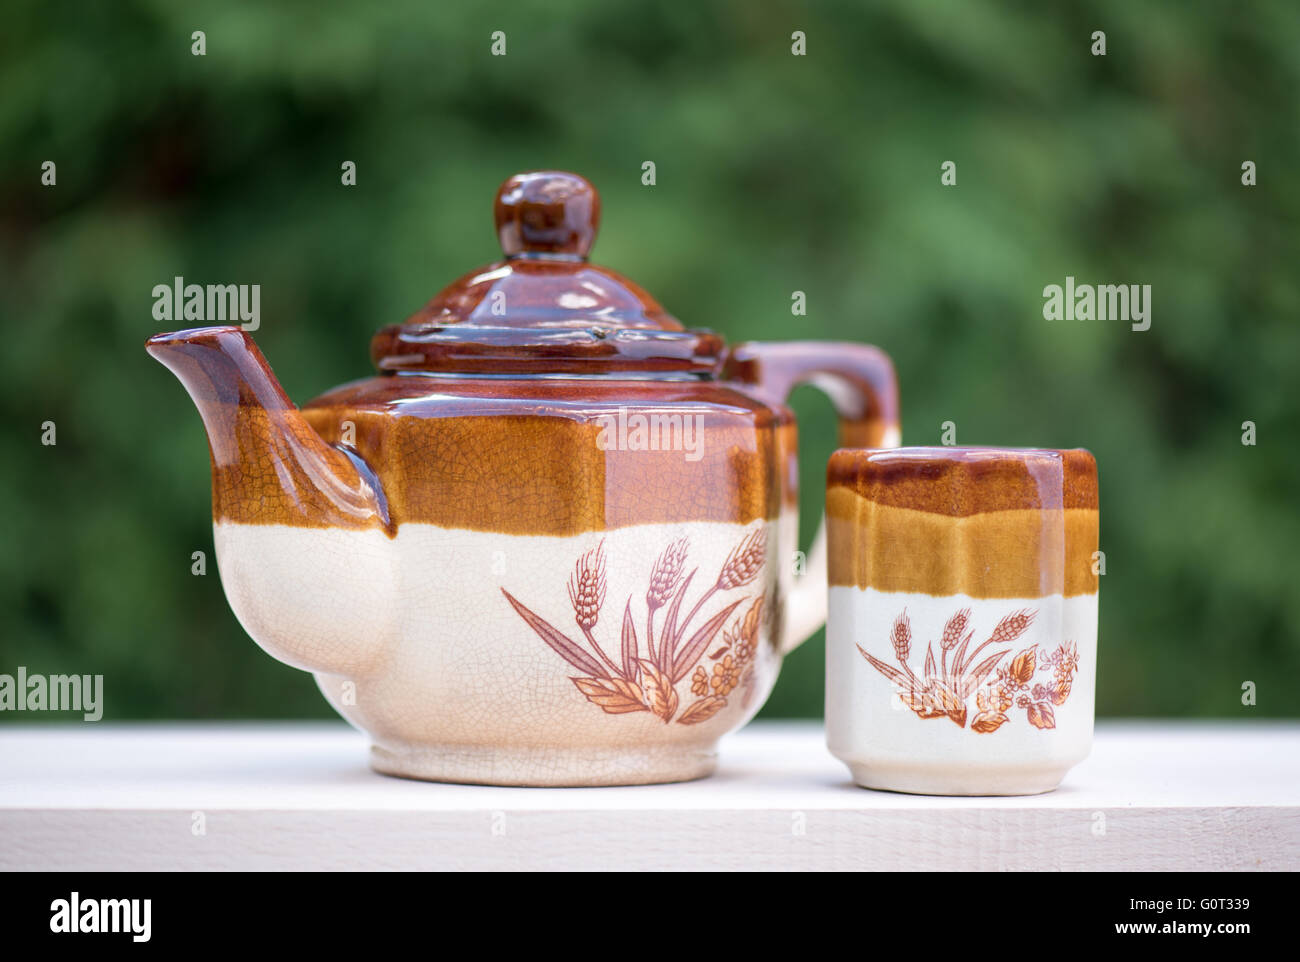 Teapot with tea-cup exteriorly Stock Photo